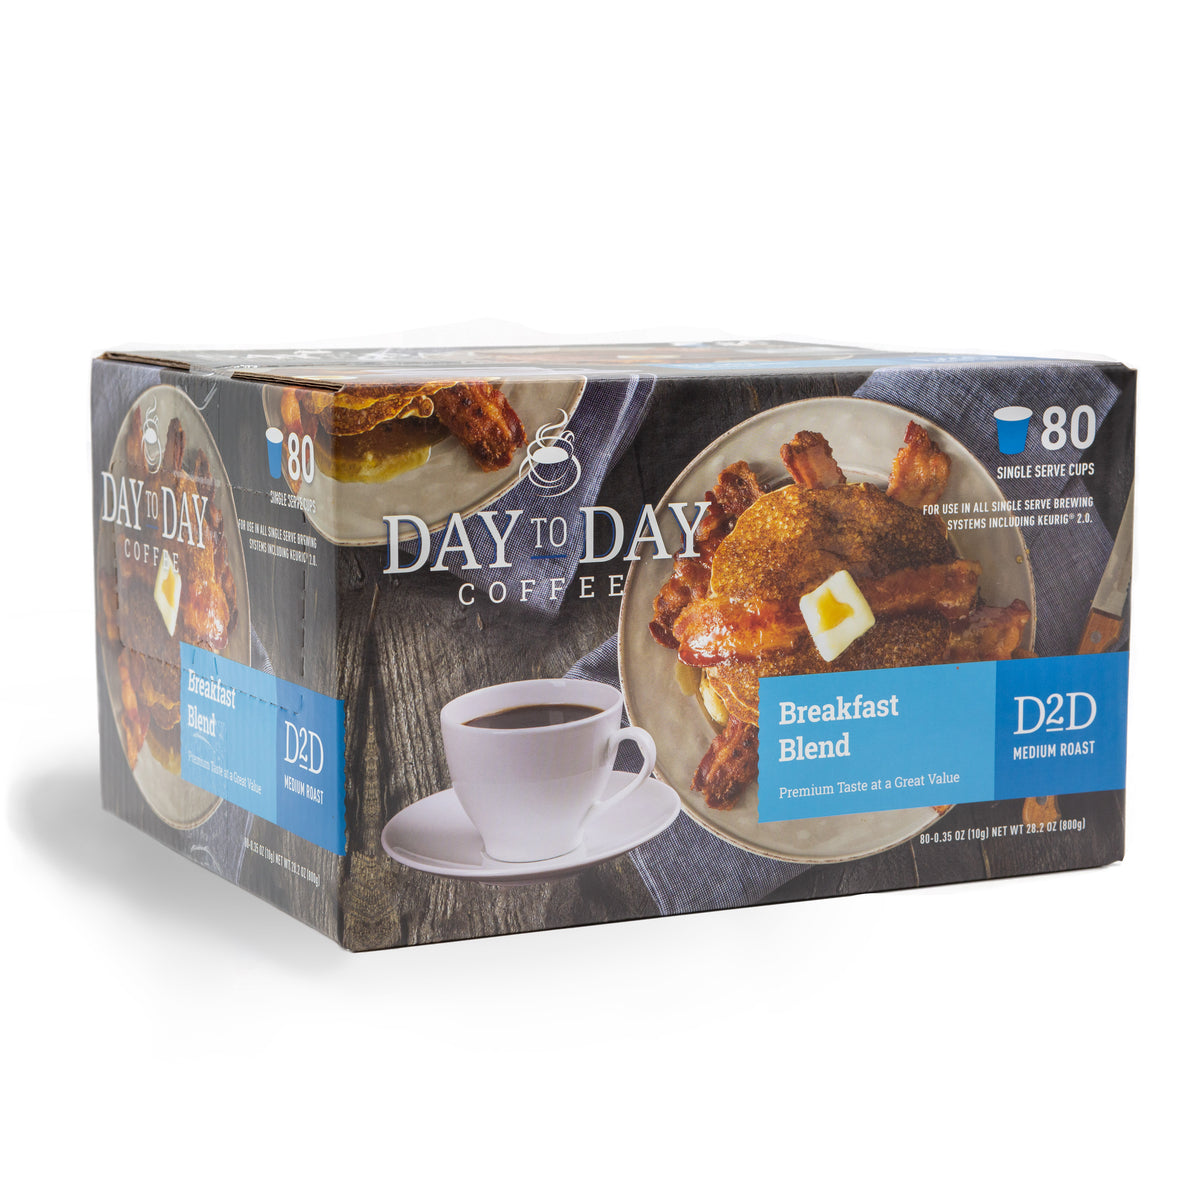 Day to day coffee 80 count breakfast blend medium roast coffee pods for single serve coffee brewer